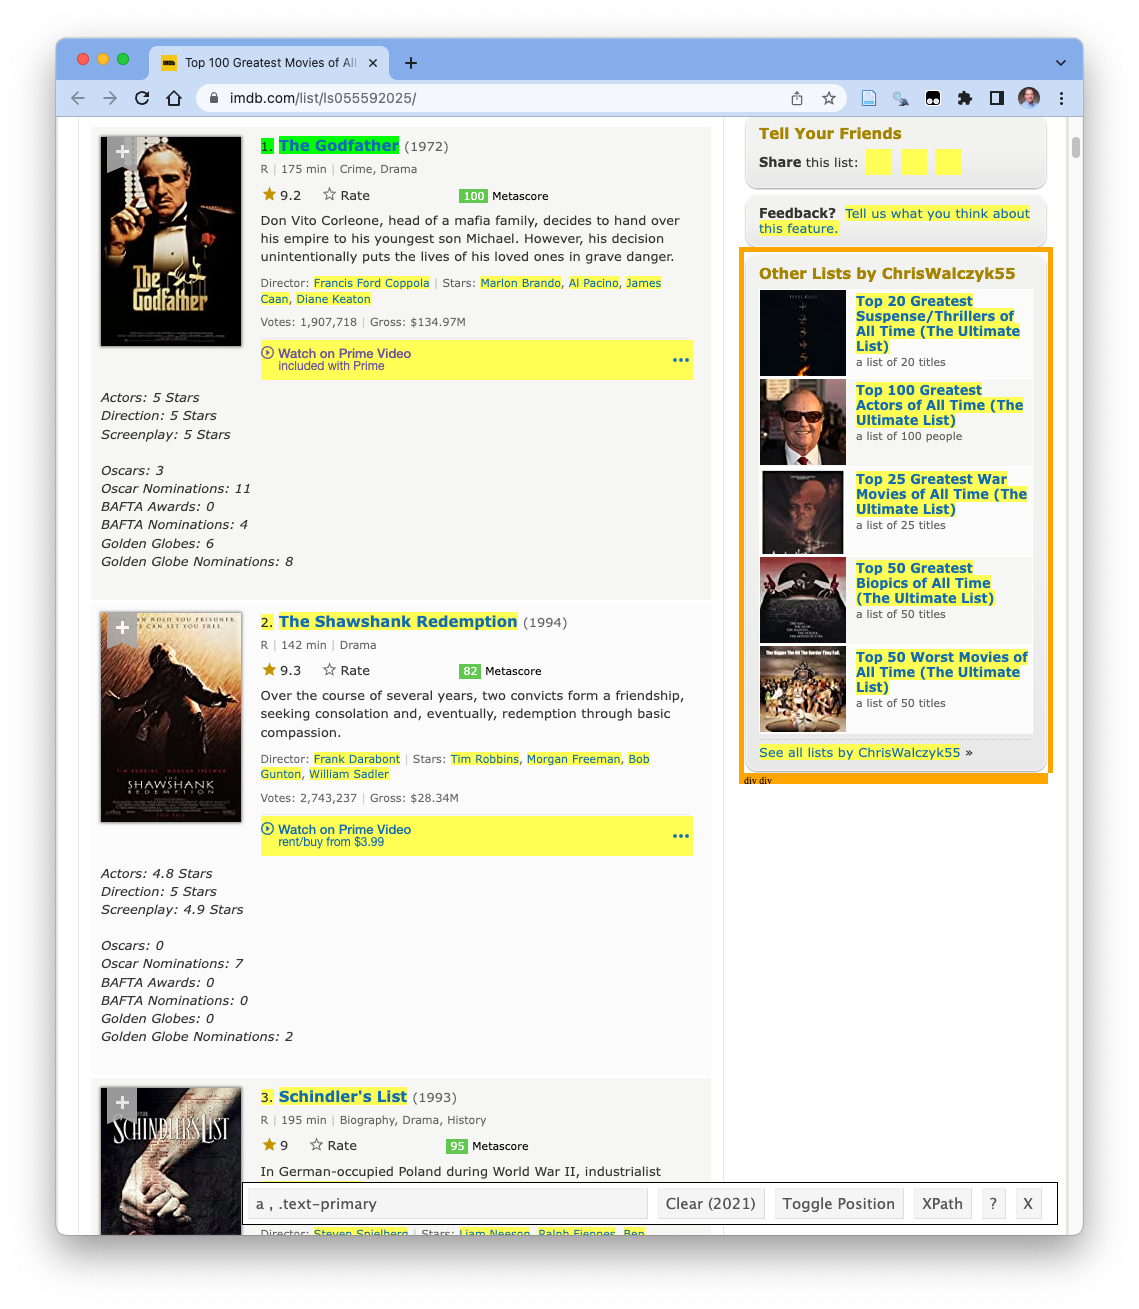 Now the web page shows the elements '1' and 'The Godfather' highlighted in green, many eements highlighted in yellow, and 2021 items selected.